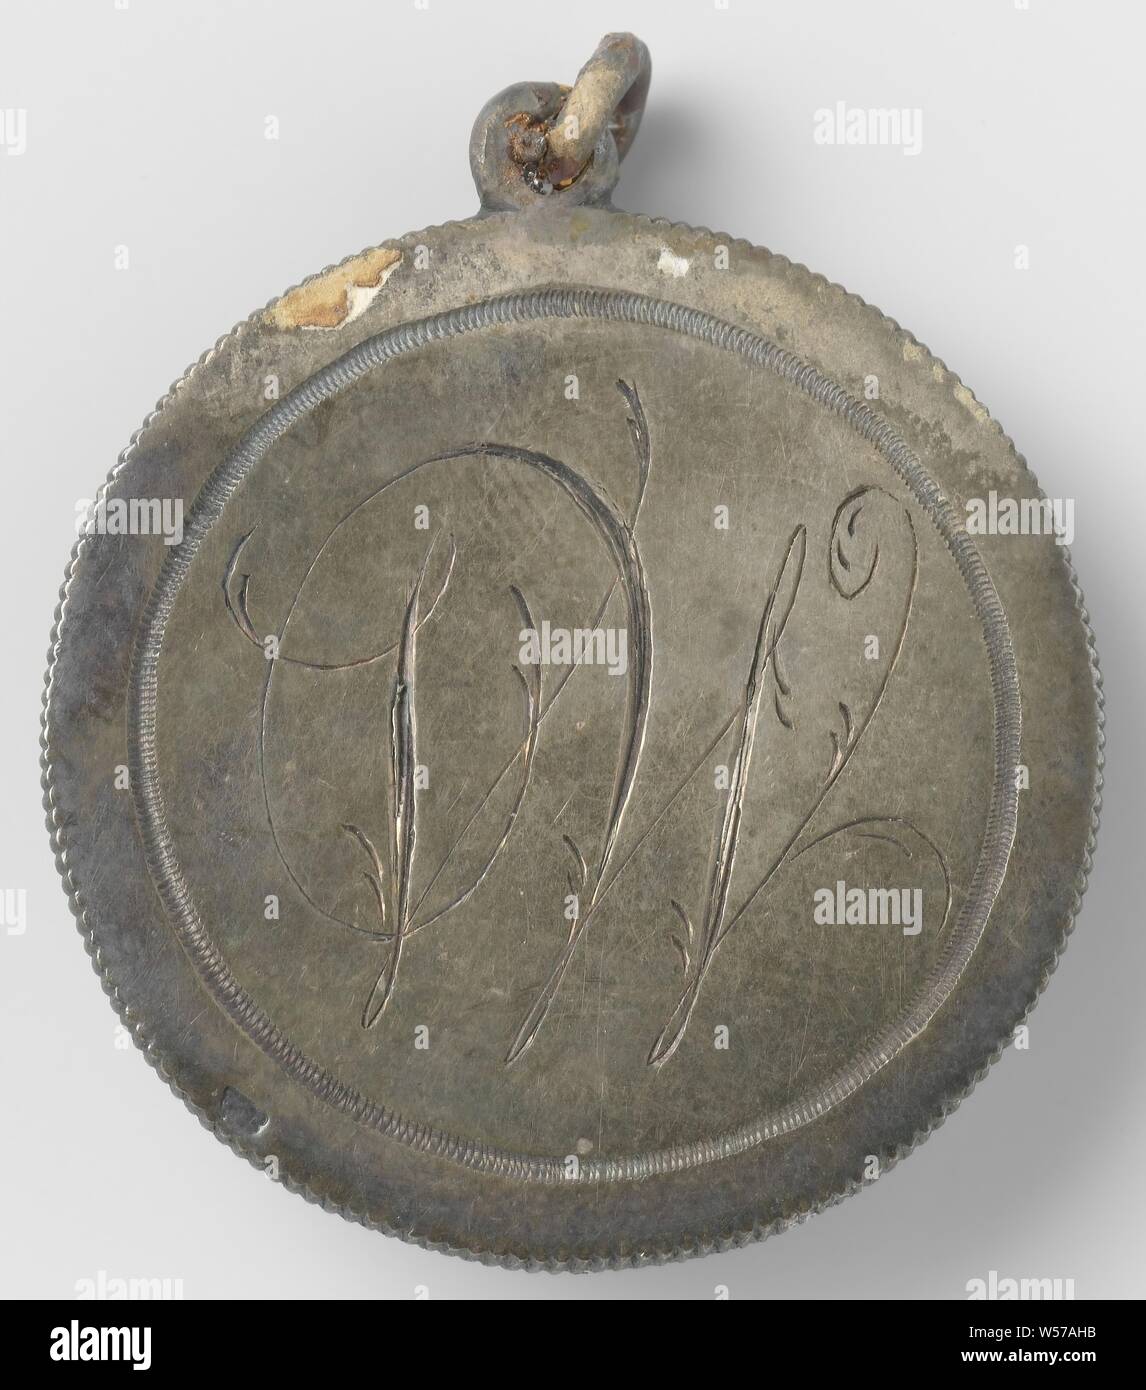 Society for the promotion of art and science under the phrase 'Progress through Science', medal awarded to D. van Coppenaal, Silver medal on the eye and the ring. Front: letters V and W in circle. Reverse: inscription, Amsterdam, D. van Coppenaal, Hendrik de Heus, 1806 - 1814, silver (metal), engraving, d 3.8 cm × d 3.6 cm × d 3.3 cm × w 14.82 Stock Photo